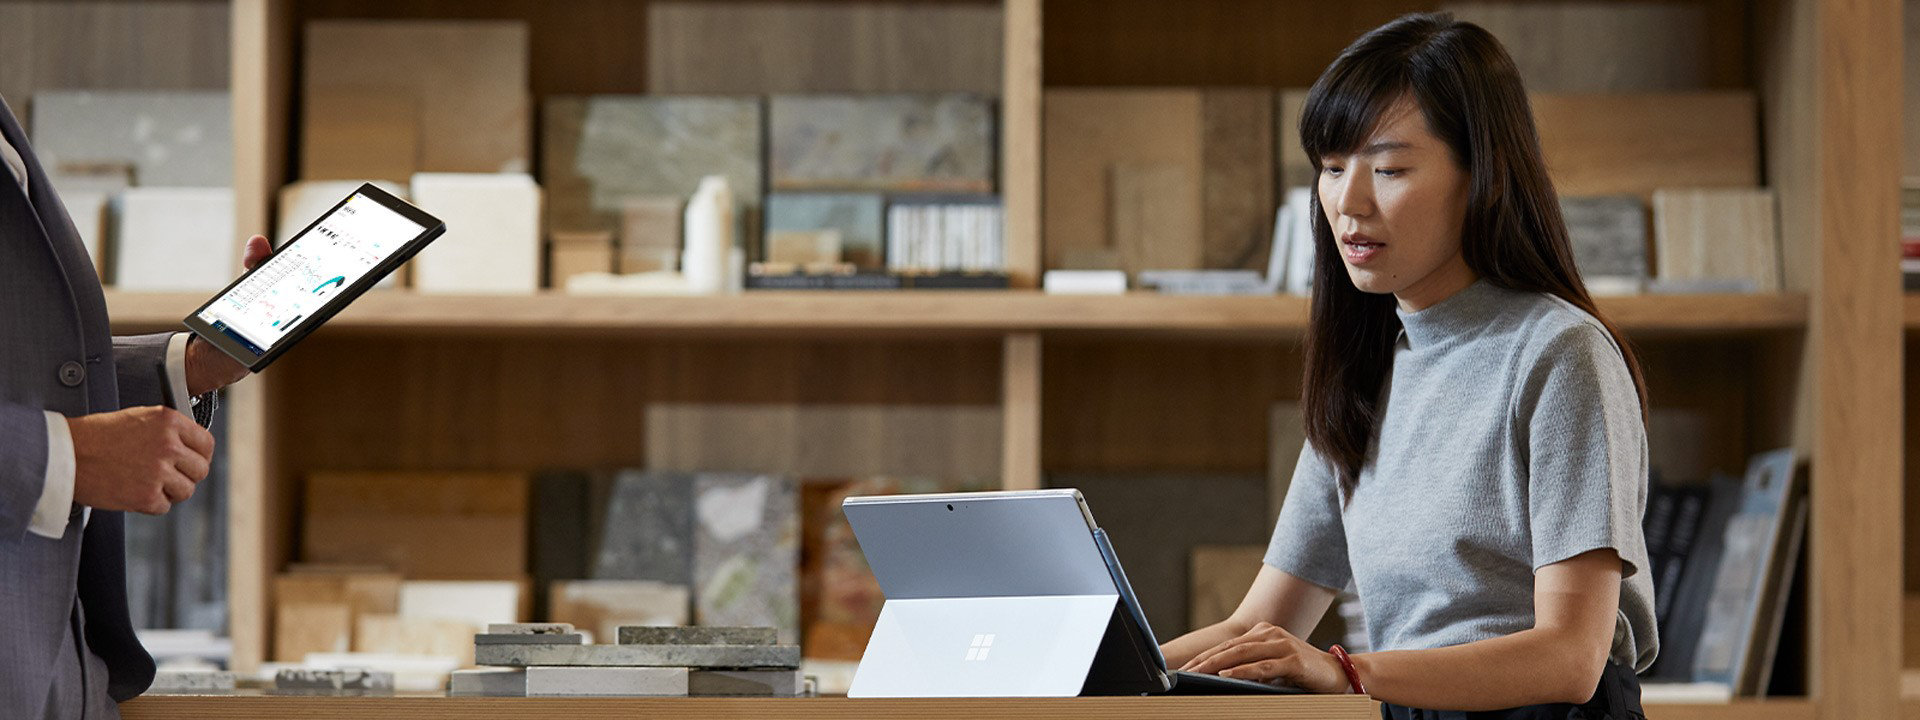 A woman and her colleague discuss business while working on their Surface devices